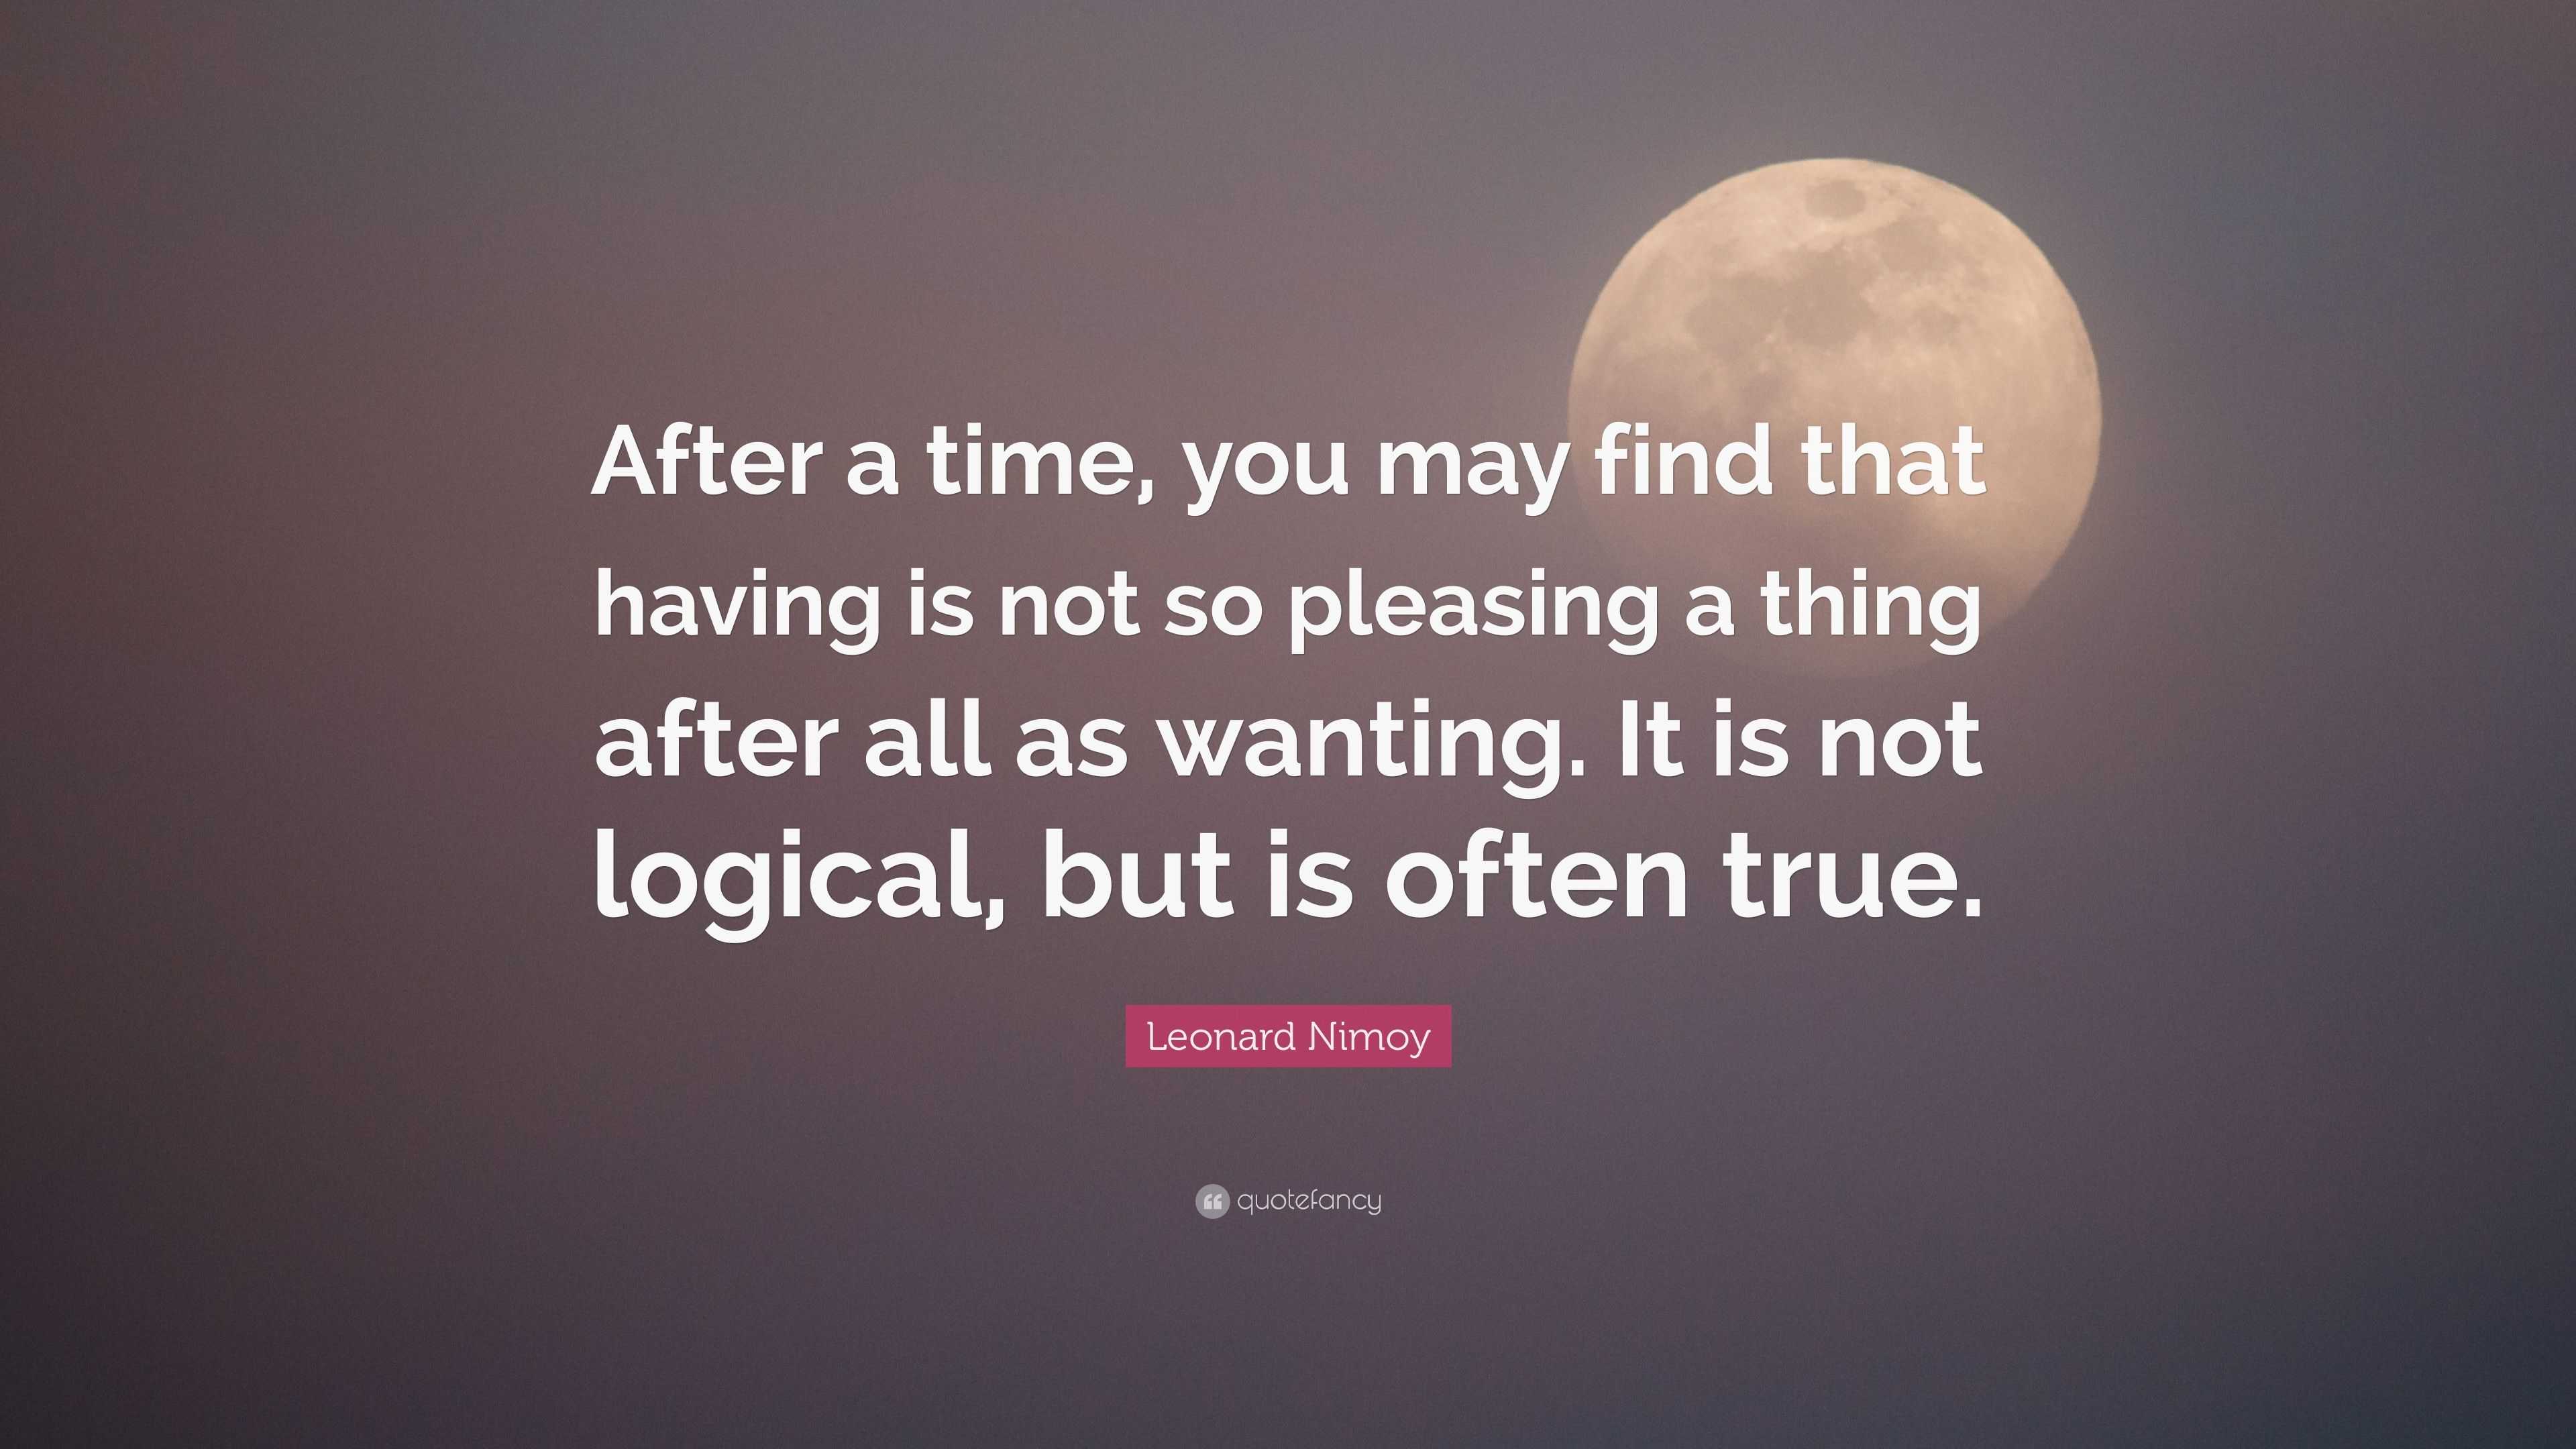 Leonard Nimoy Quote: “After a time, you may find that having is not so ...